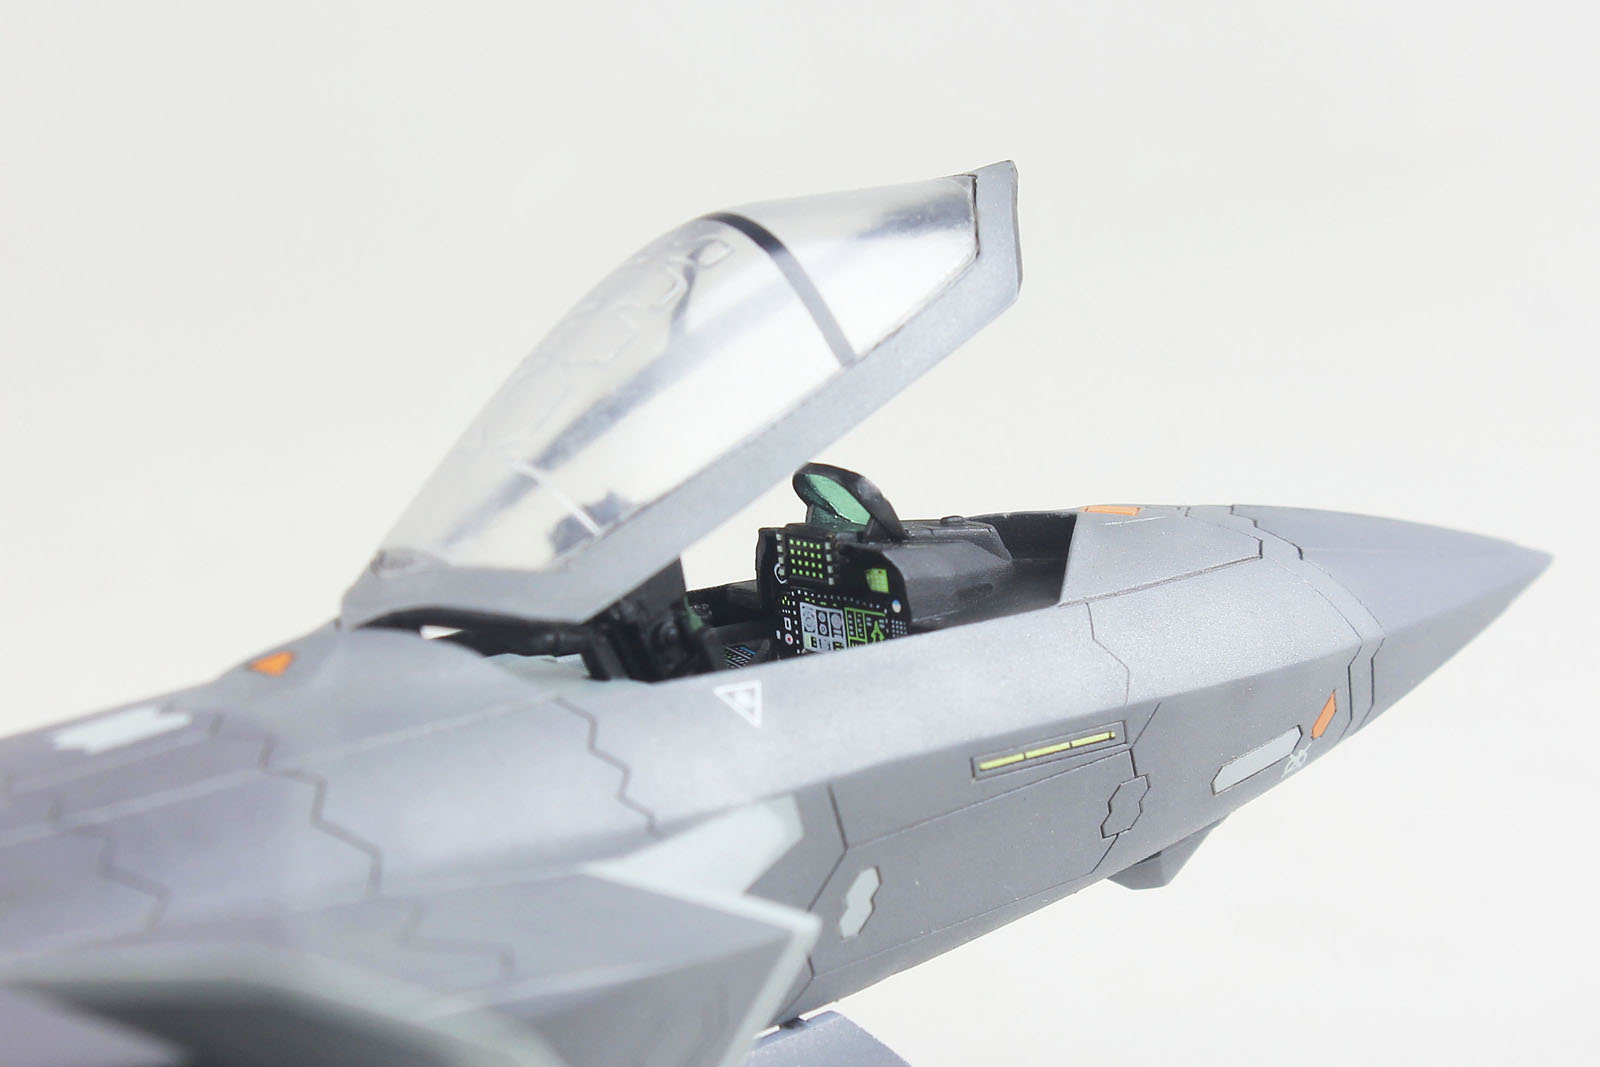 1/72 Chinese J-20 "Mighty Dragon" (in Service) - Click Image to Close